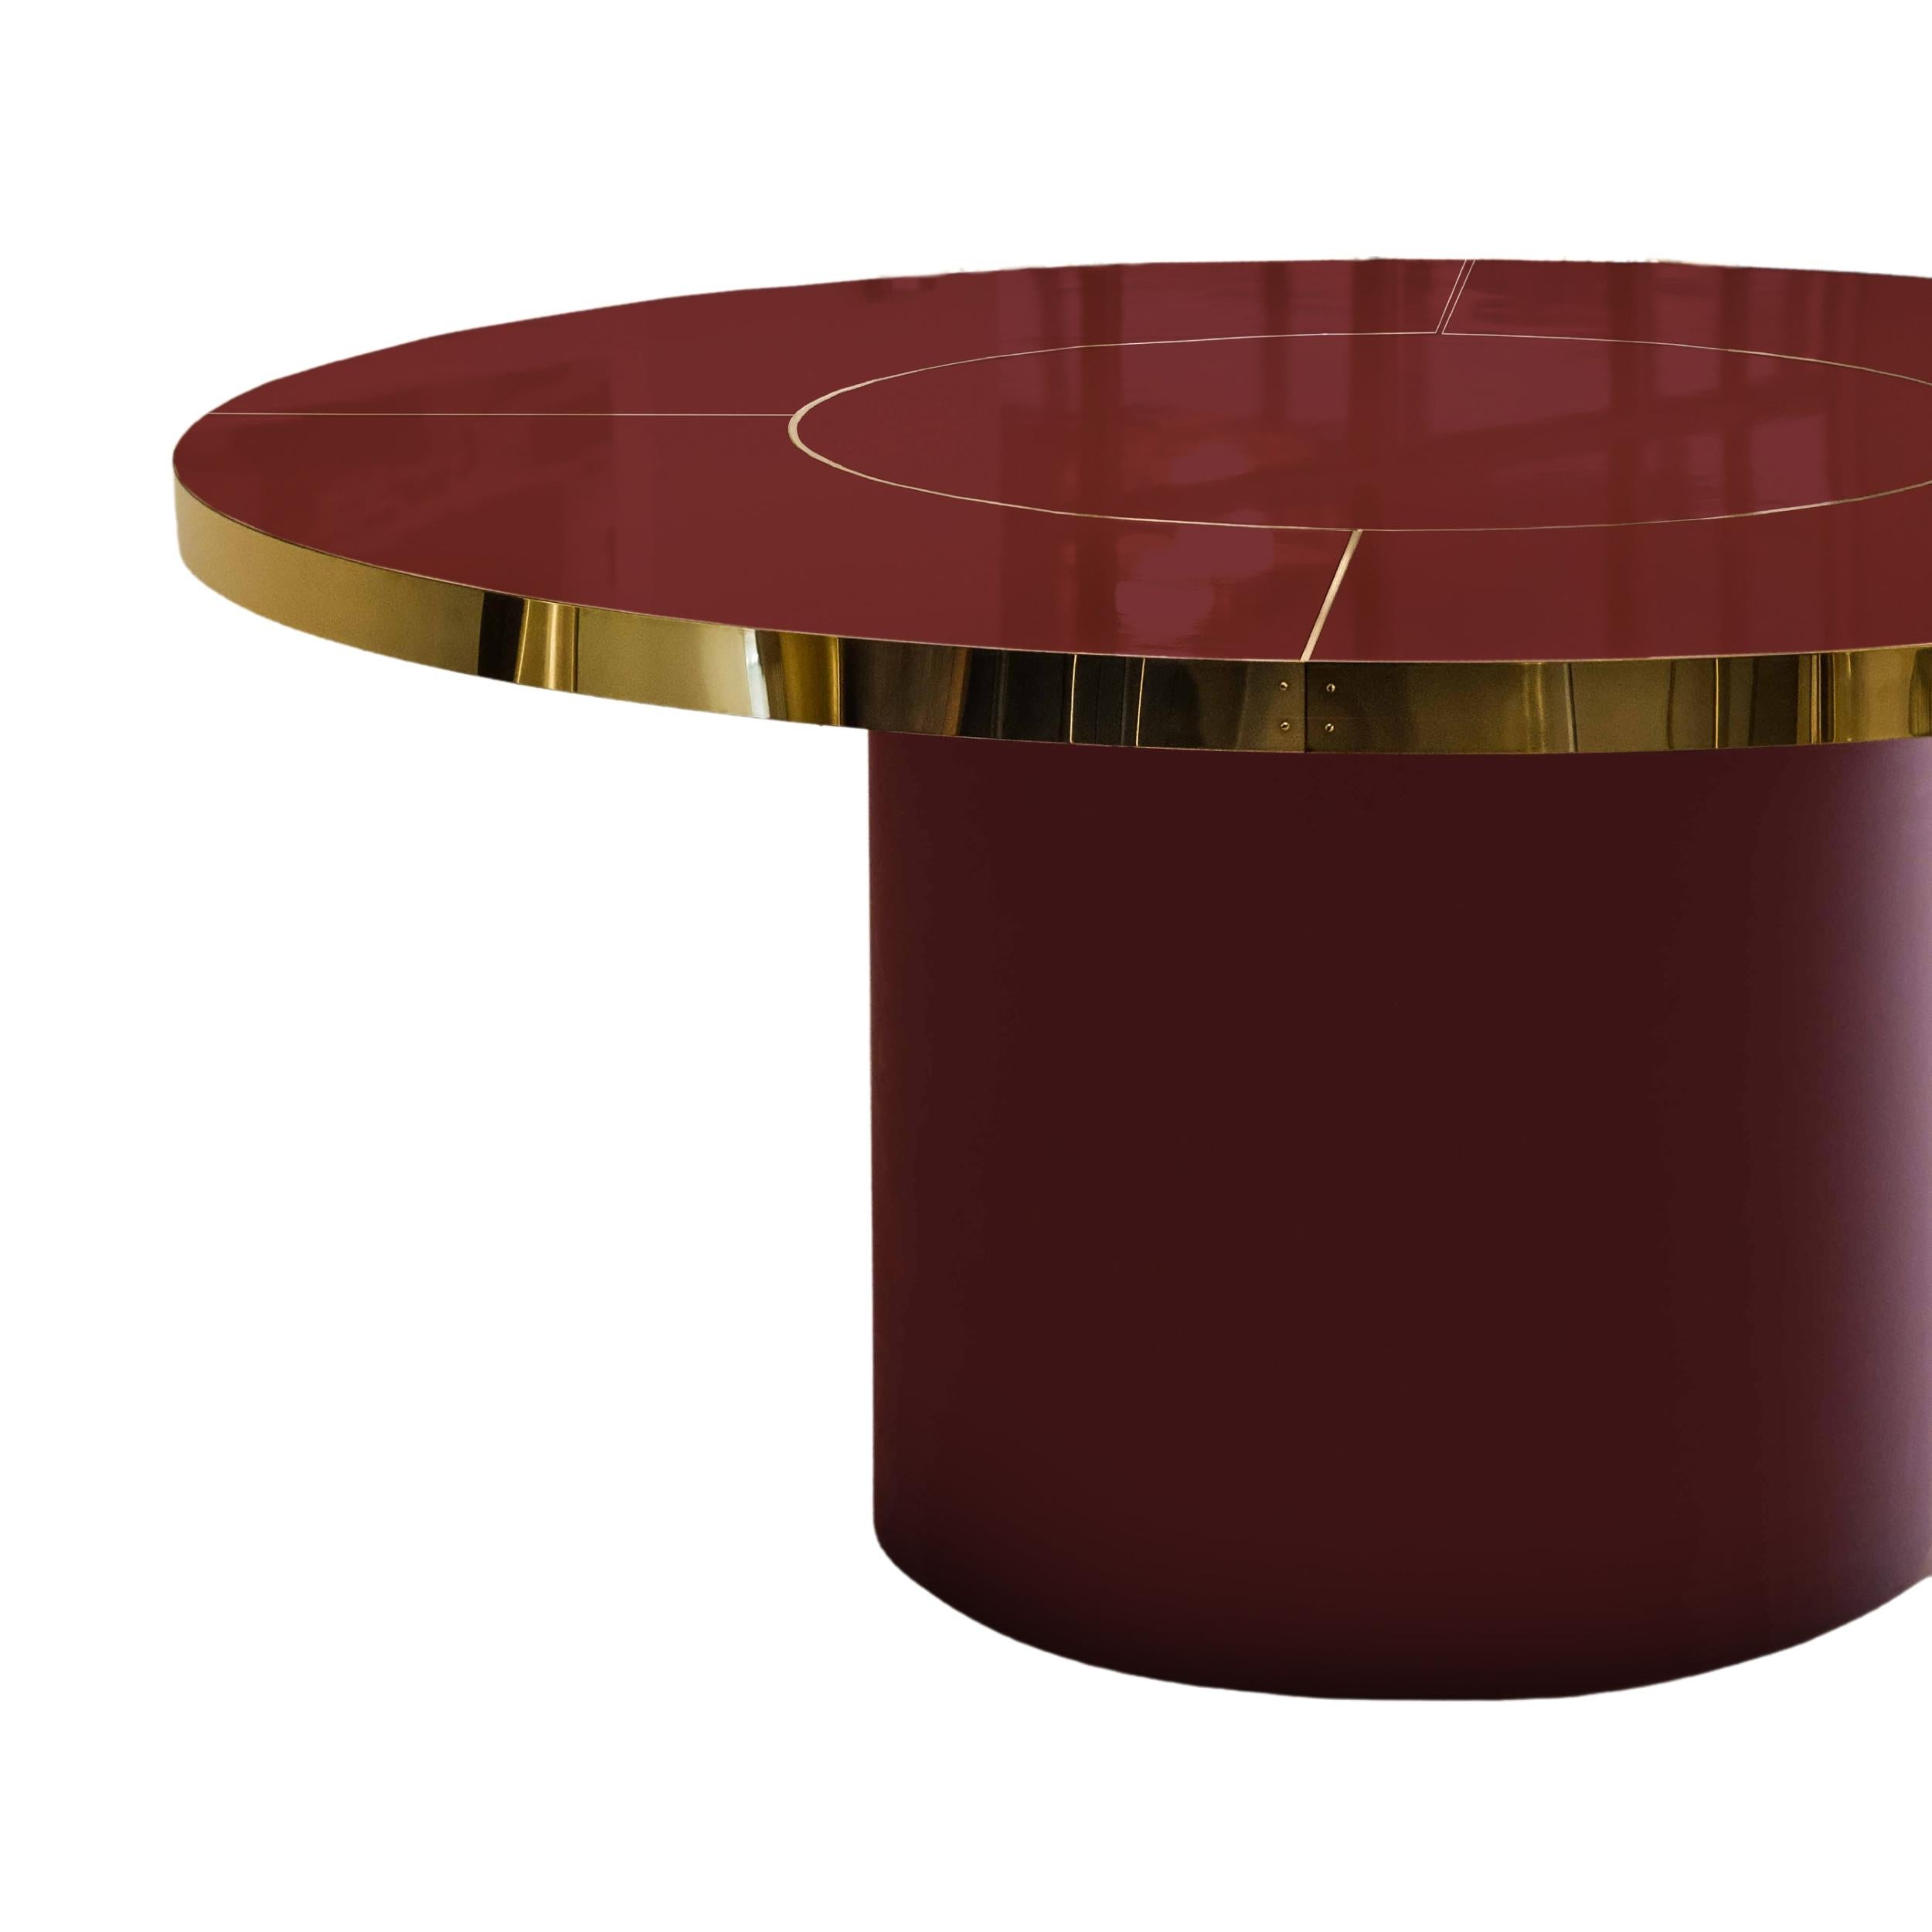 Retro Design Round Dining Table Palm Springs Style High Gloss Laminated & Satin Steel Details XXL Size

Discover our incredible collection of retro-style design tables inspired by the iconic decoration of the 1950s, 60s, and 70s of Palm Springs in